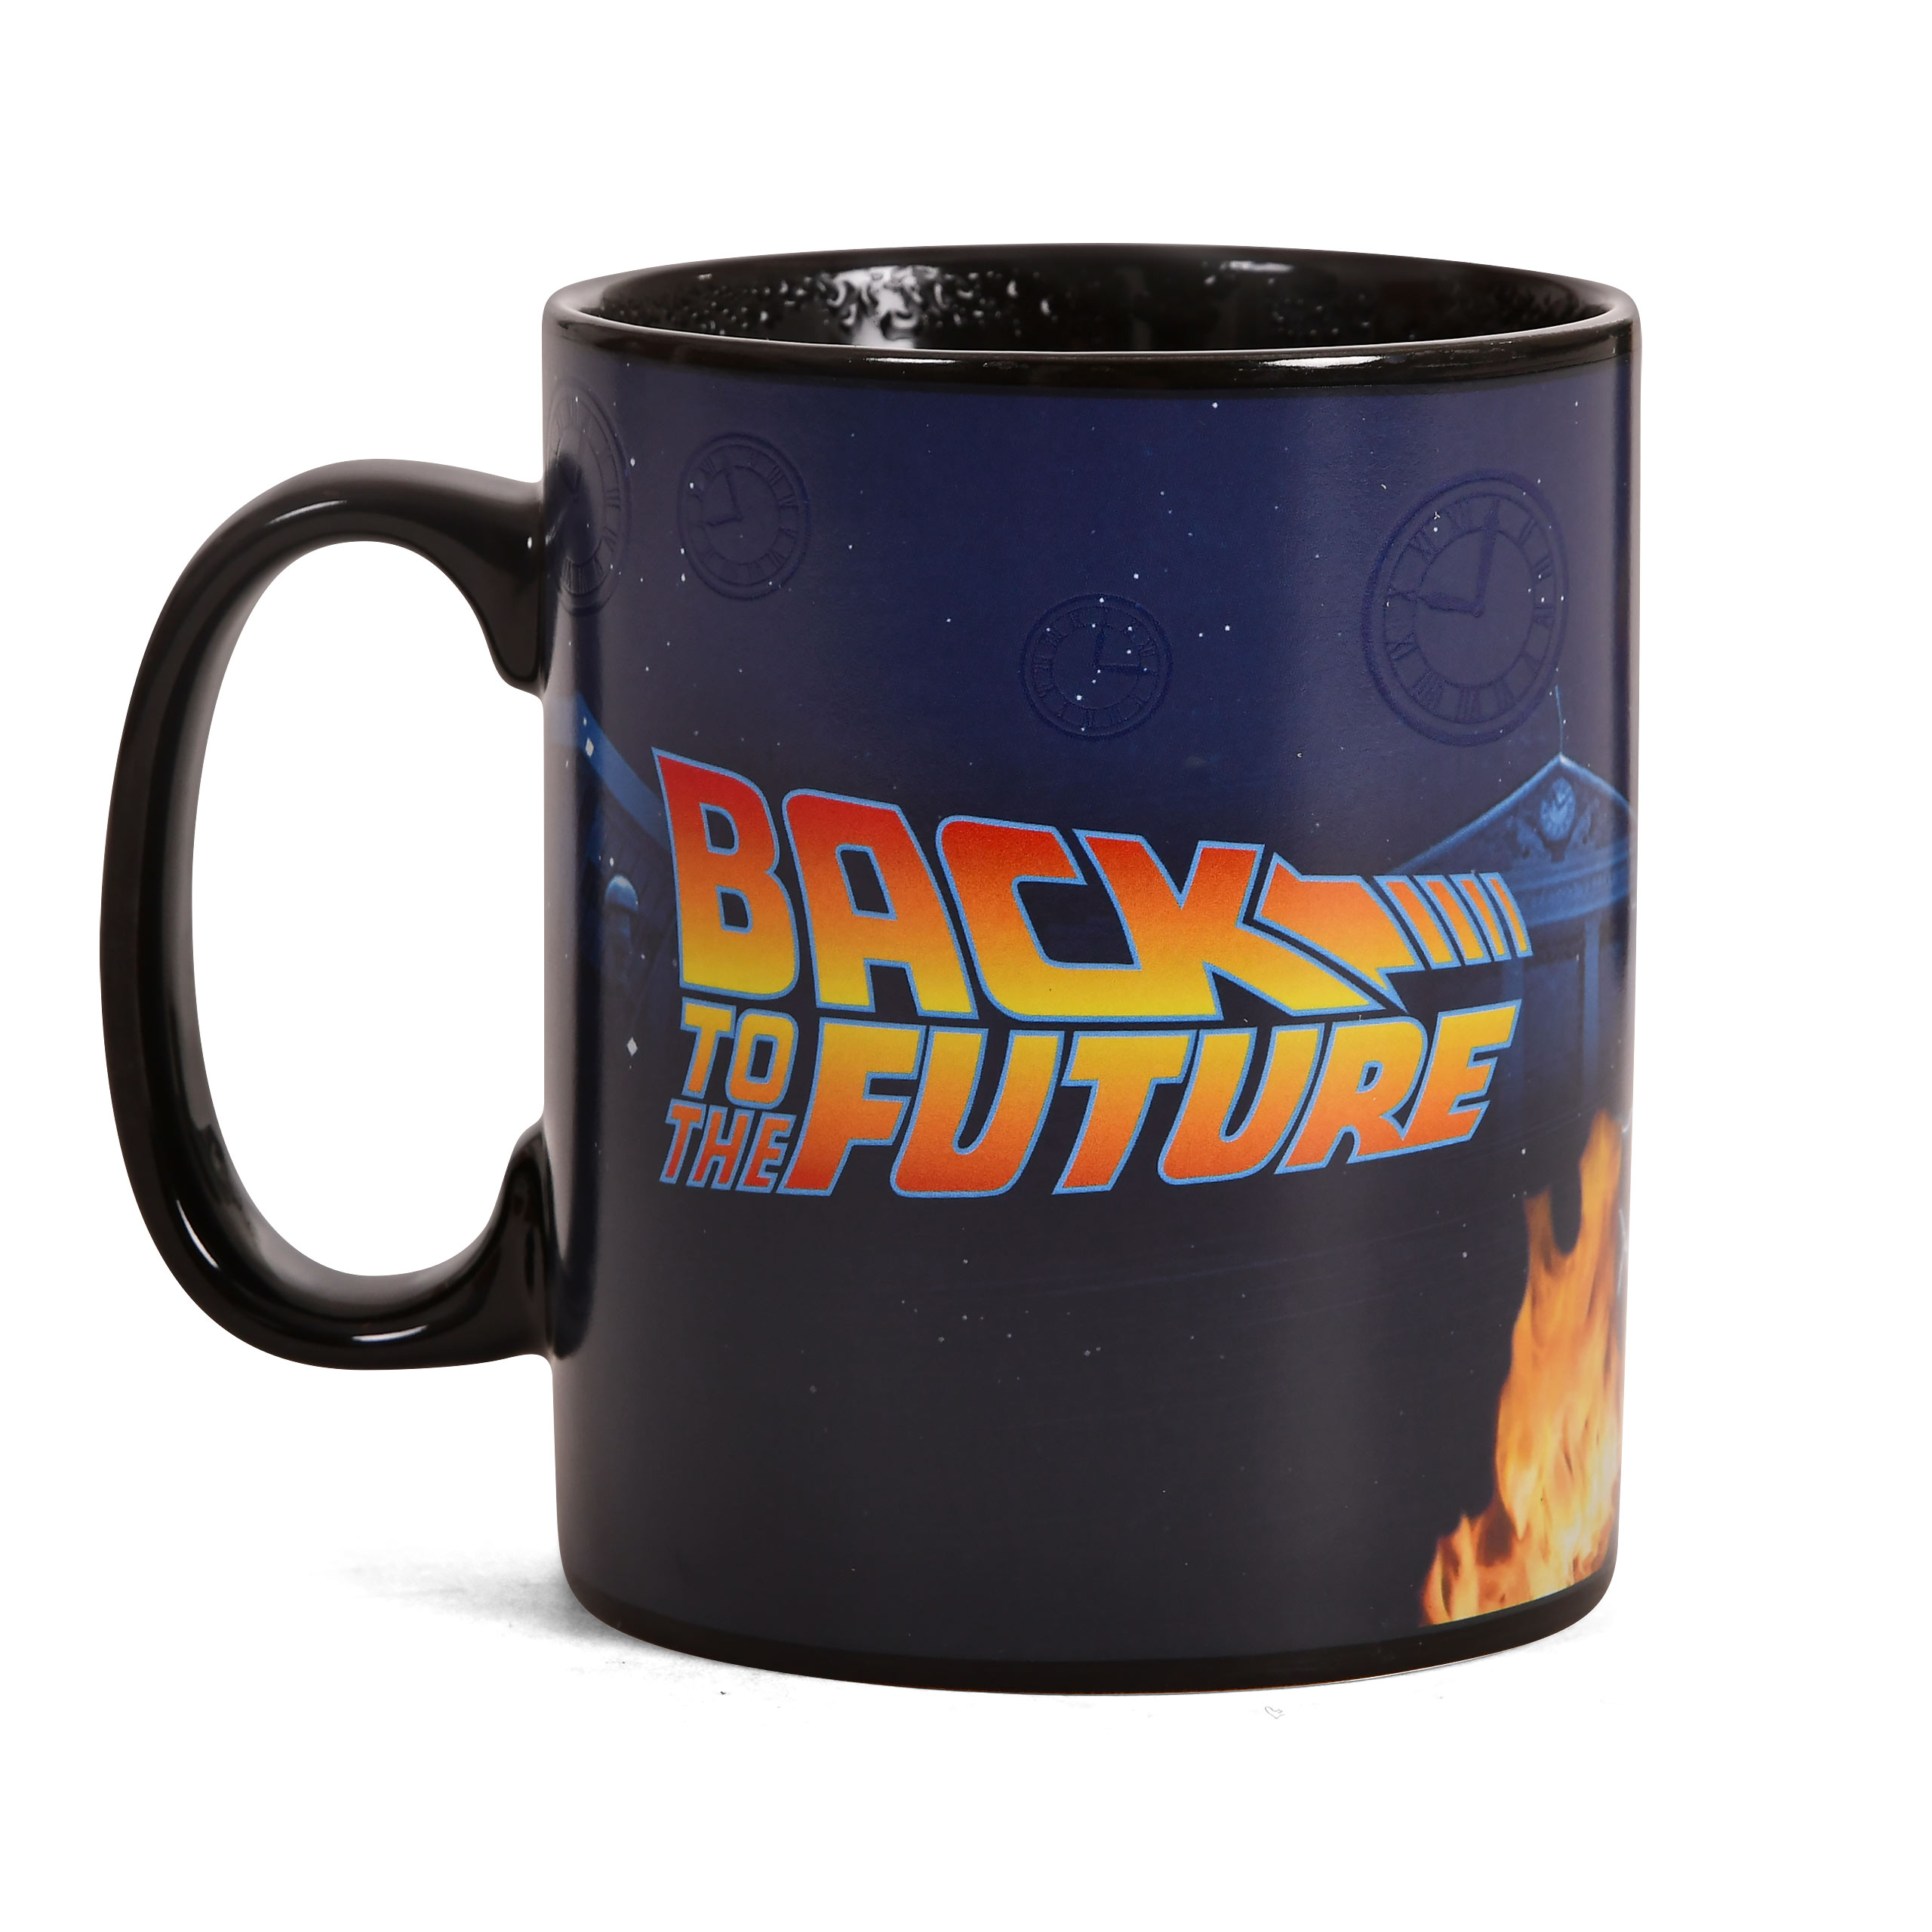 Back to the Future - Travel Time Thermoeffect Cup